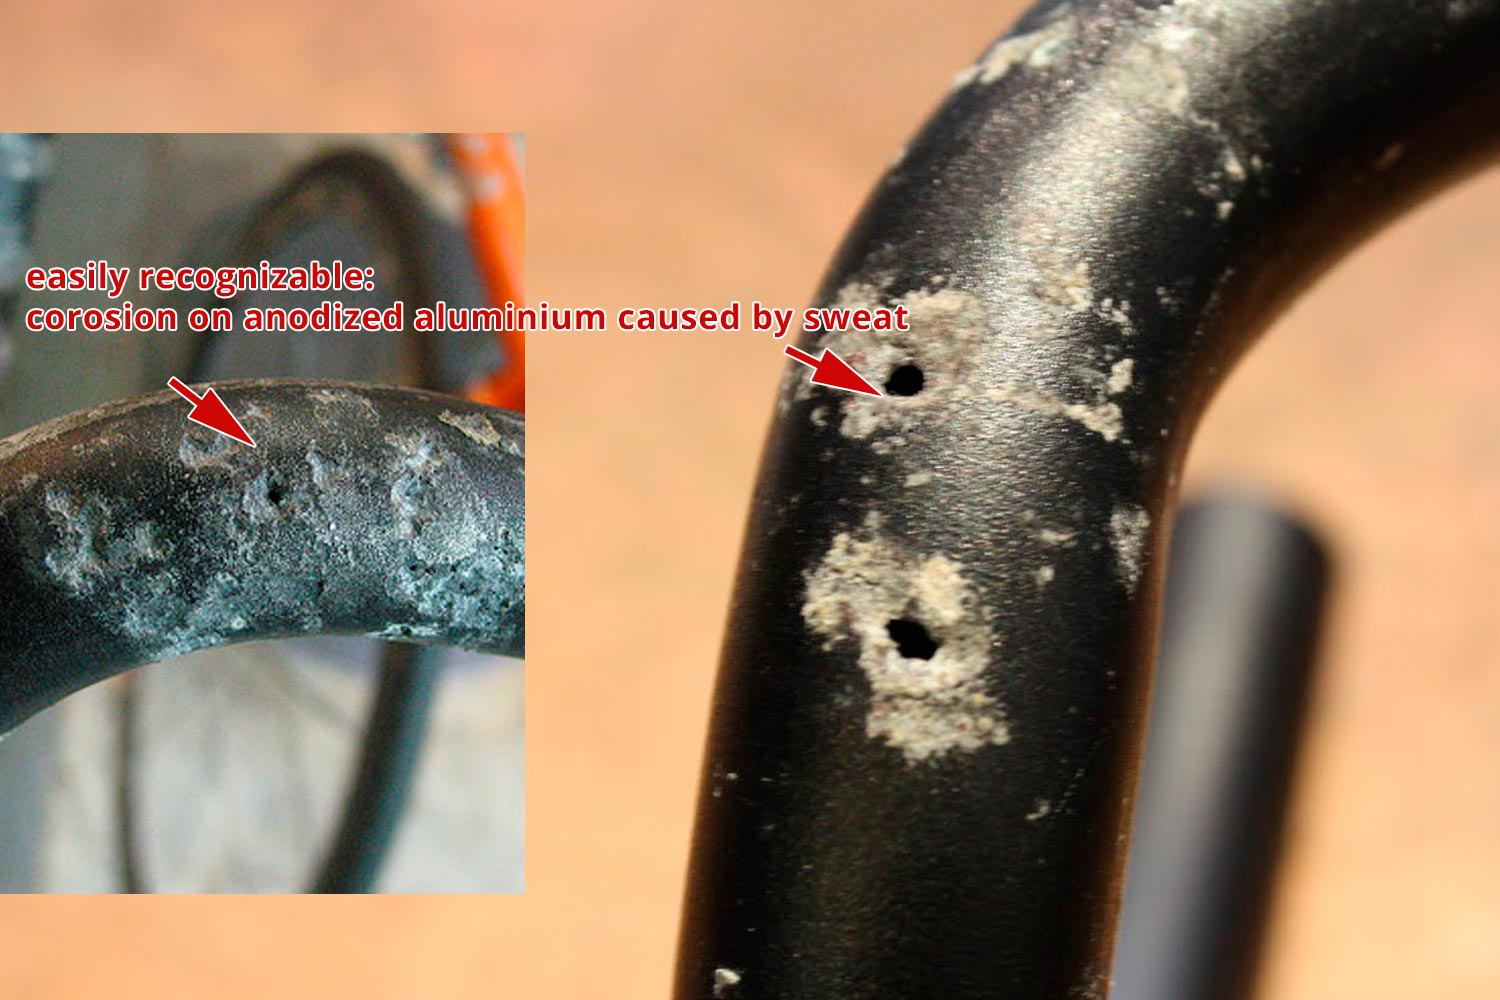 Corrosion on anodized aluminium caused by human sweat